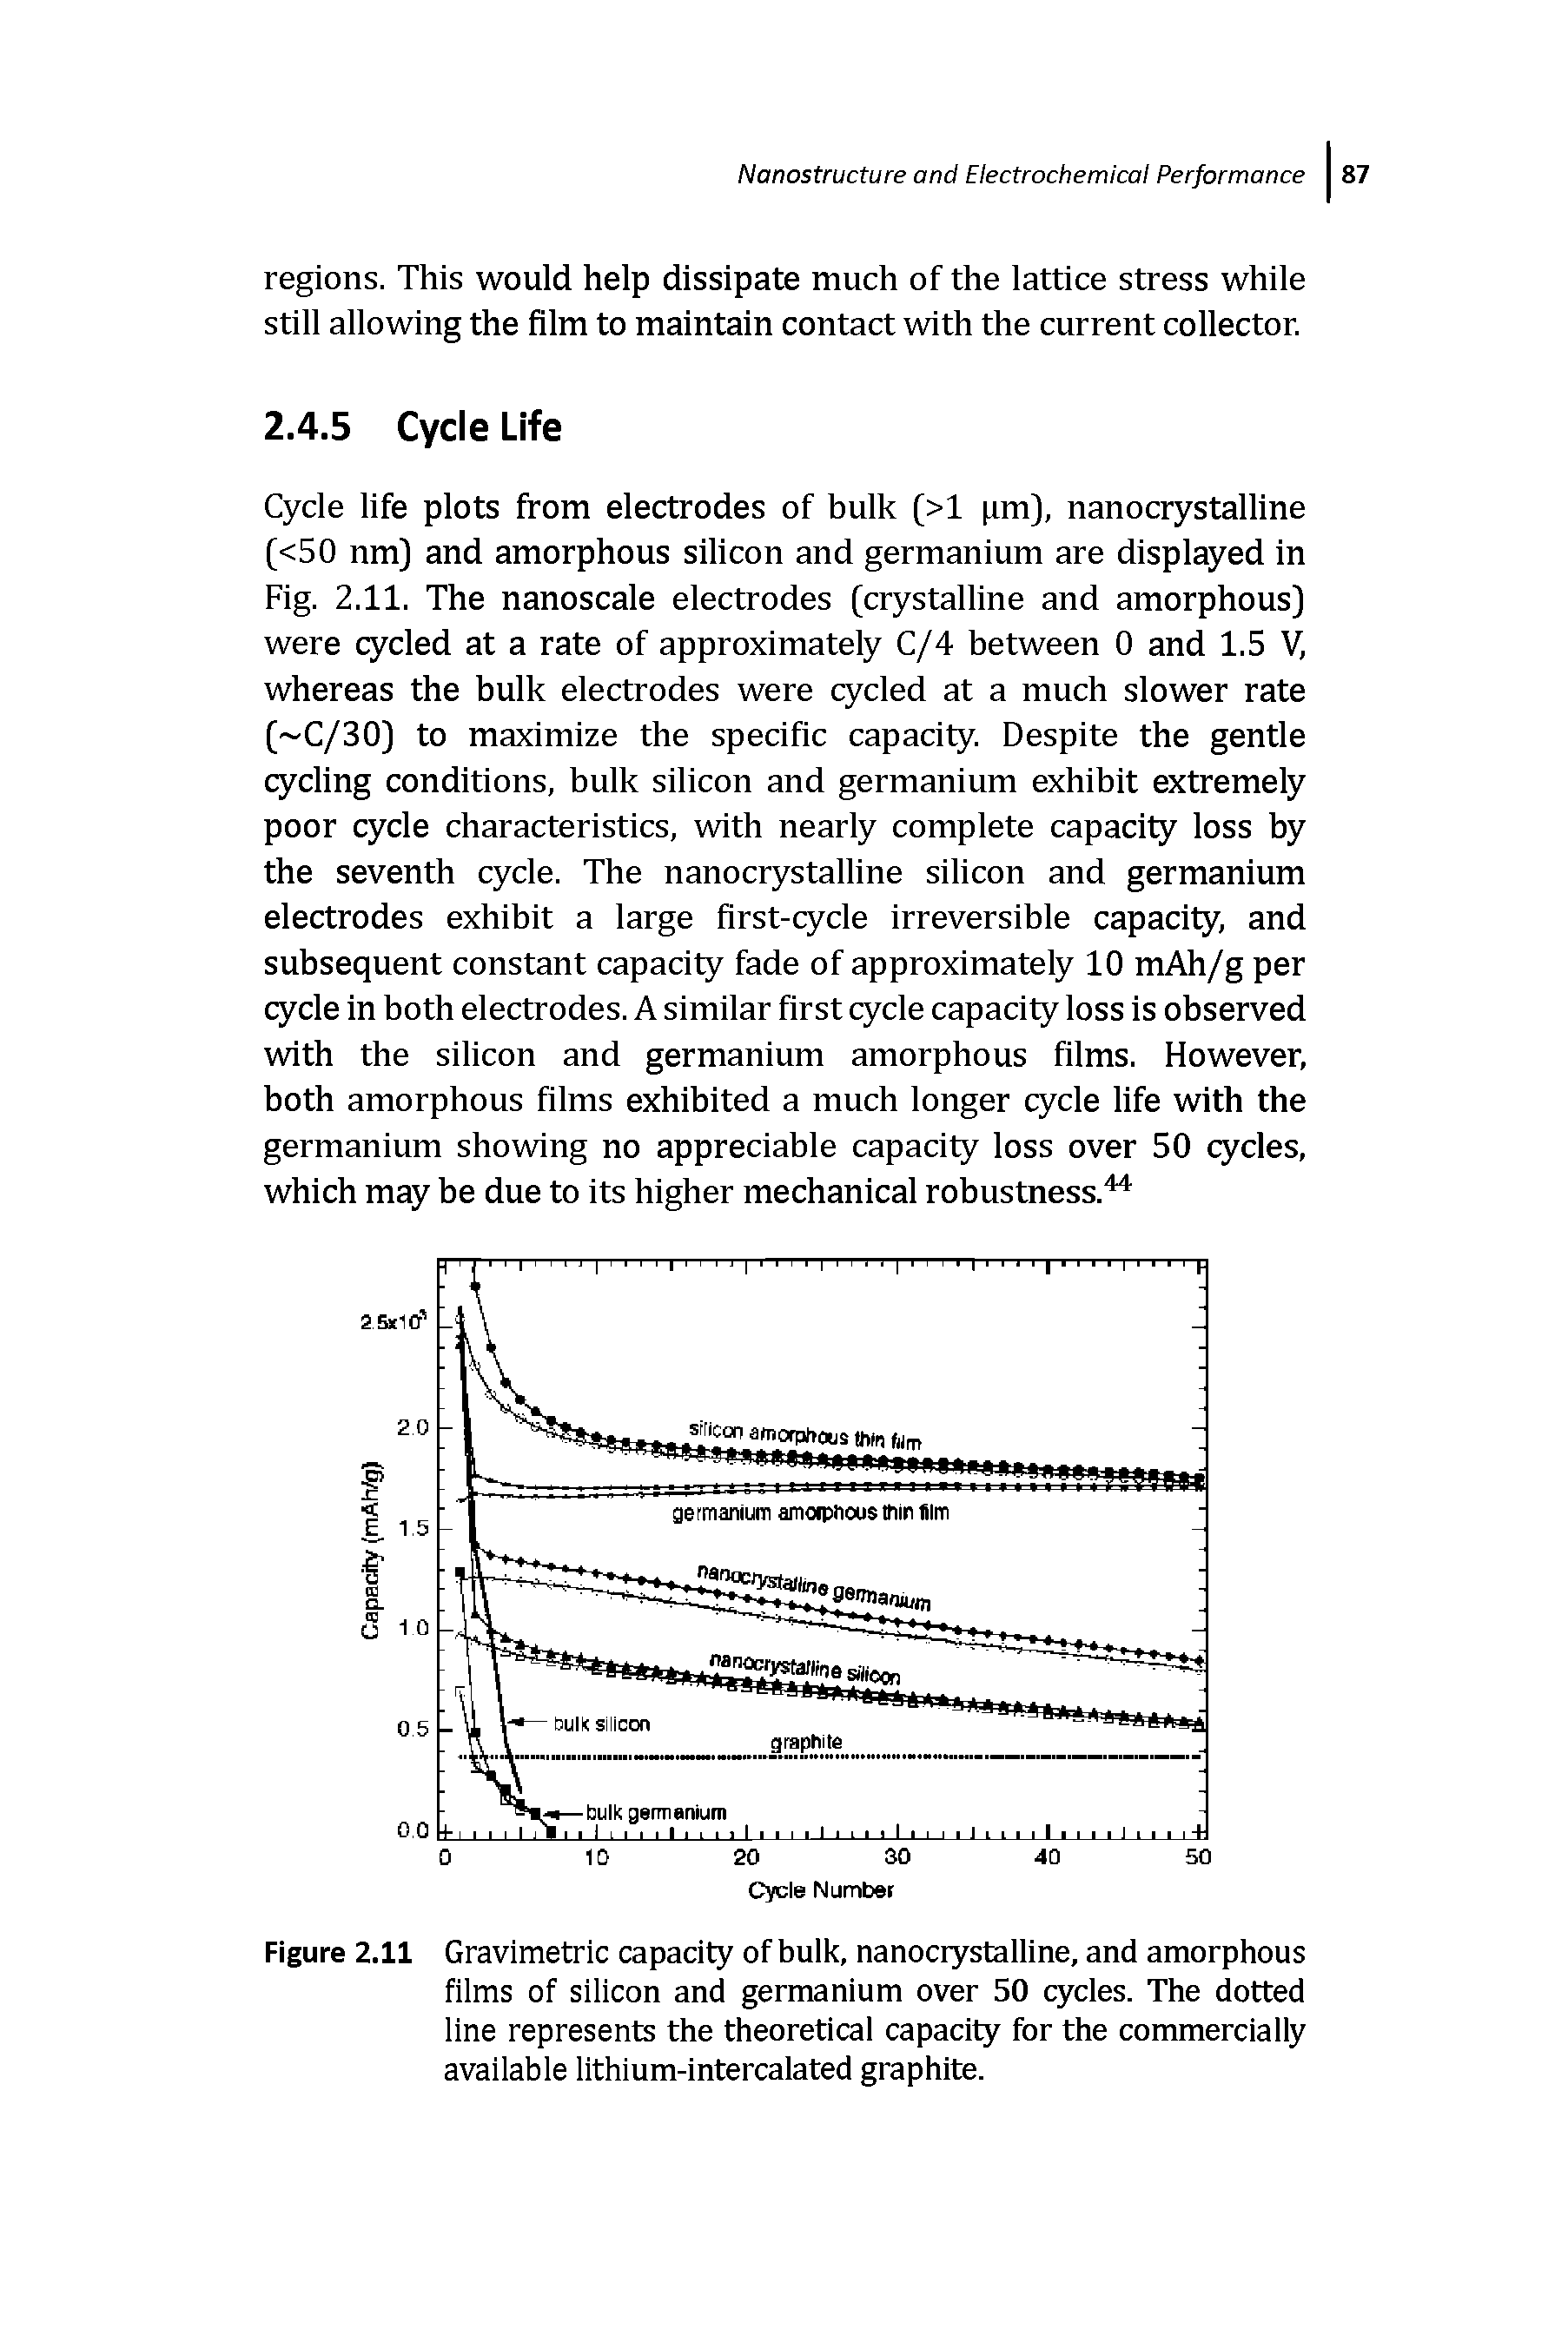 Figure 2.11 Gravimetric capacity of bulk, nanociystalline, and amorphous films of silicon and germanium over 50 cycles. The dotted line represents the theoretical capacity for the commercially available lithium-intercalated graphite.